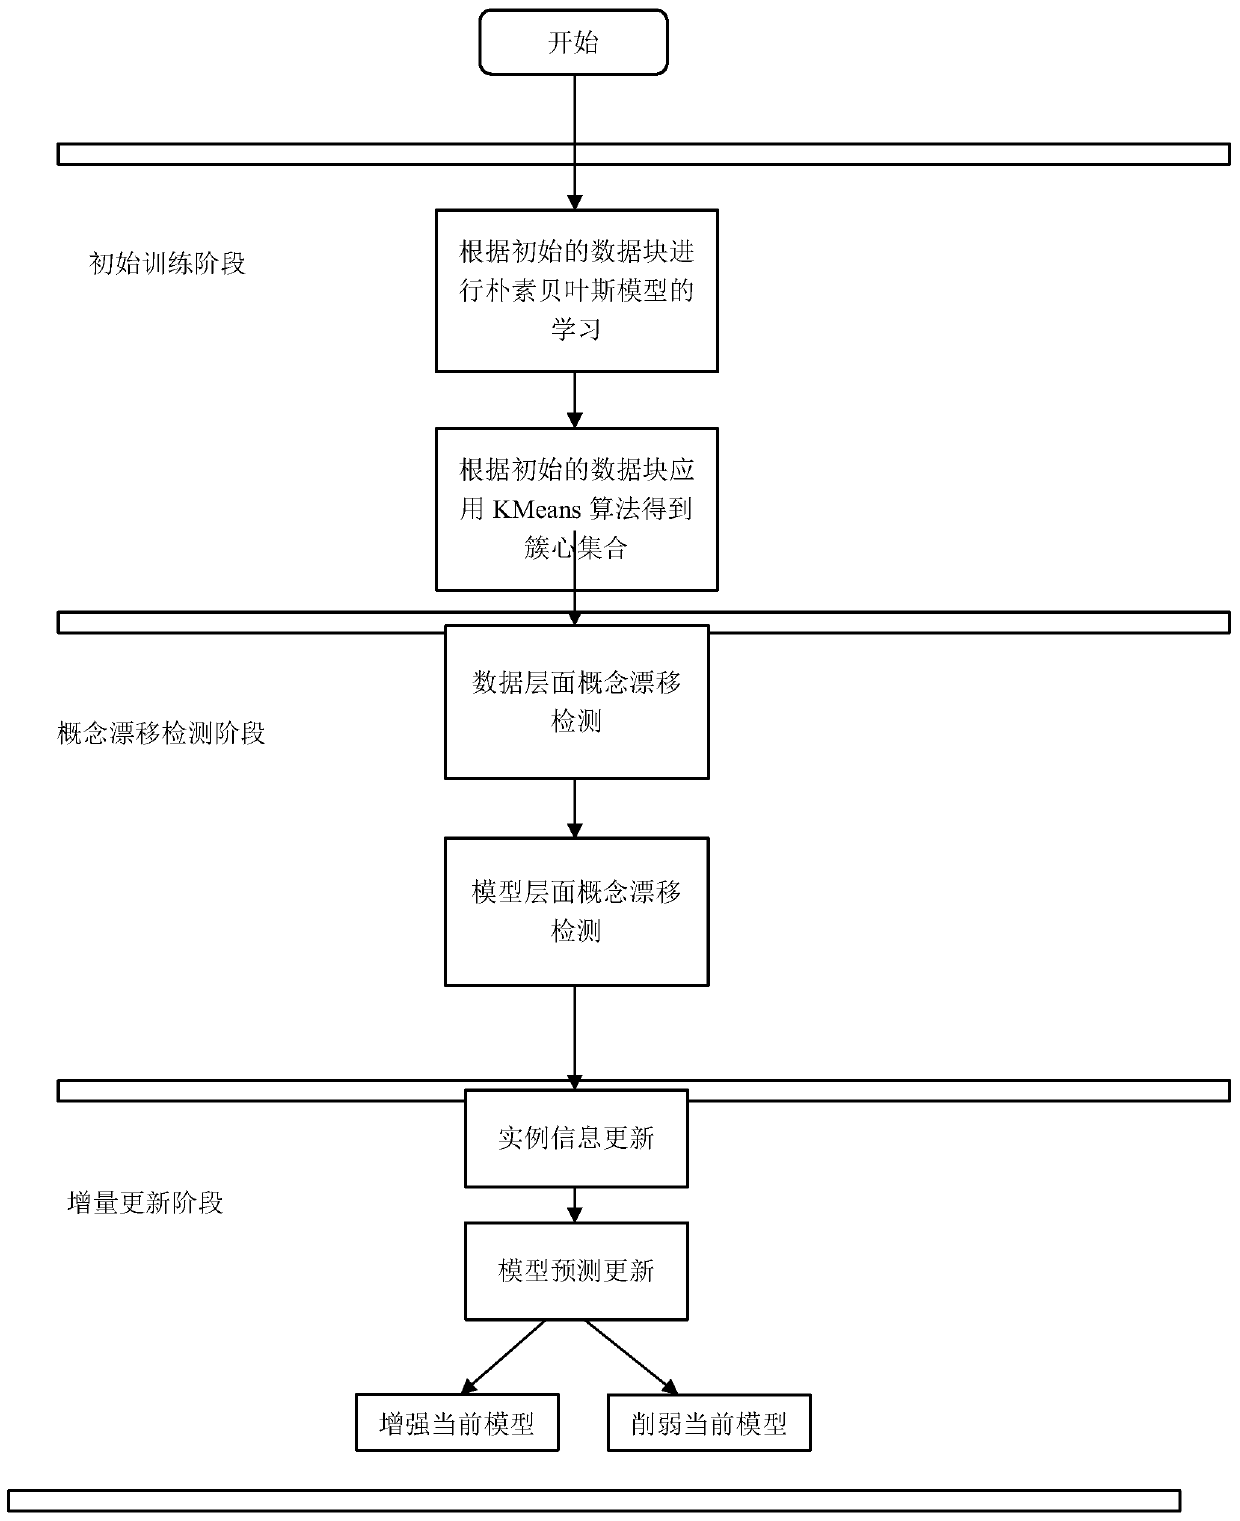 Multi-label data flow classification method based on incremental learning